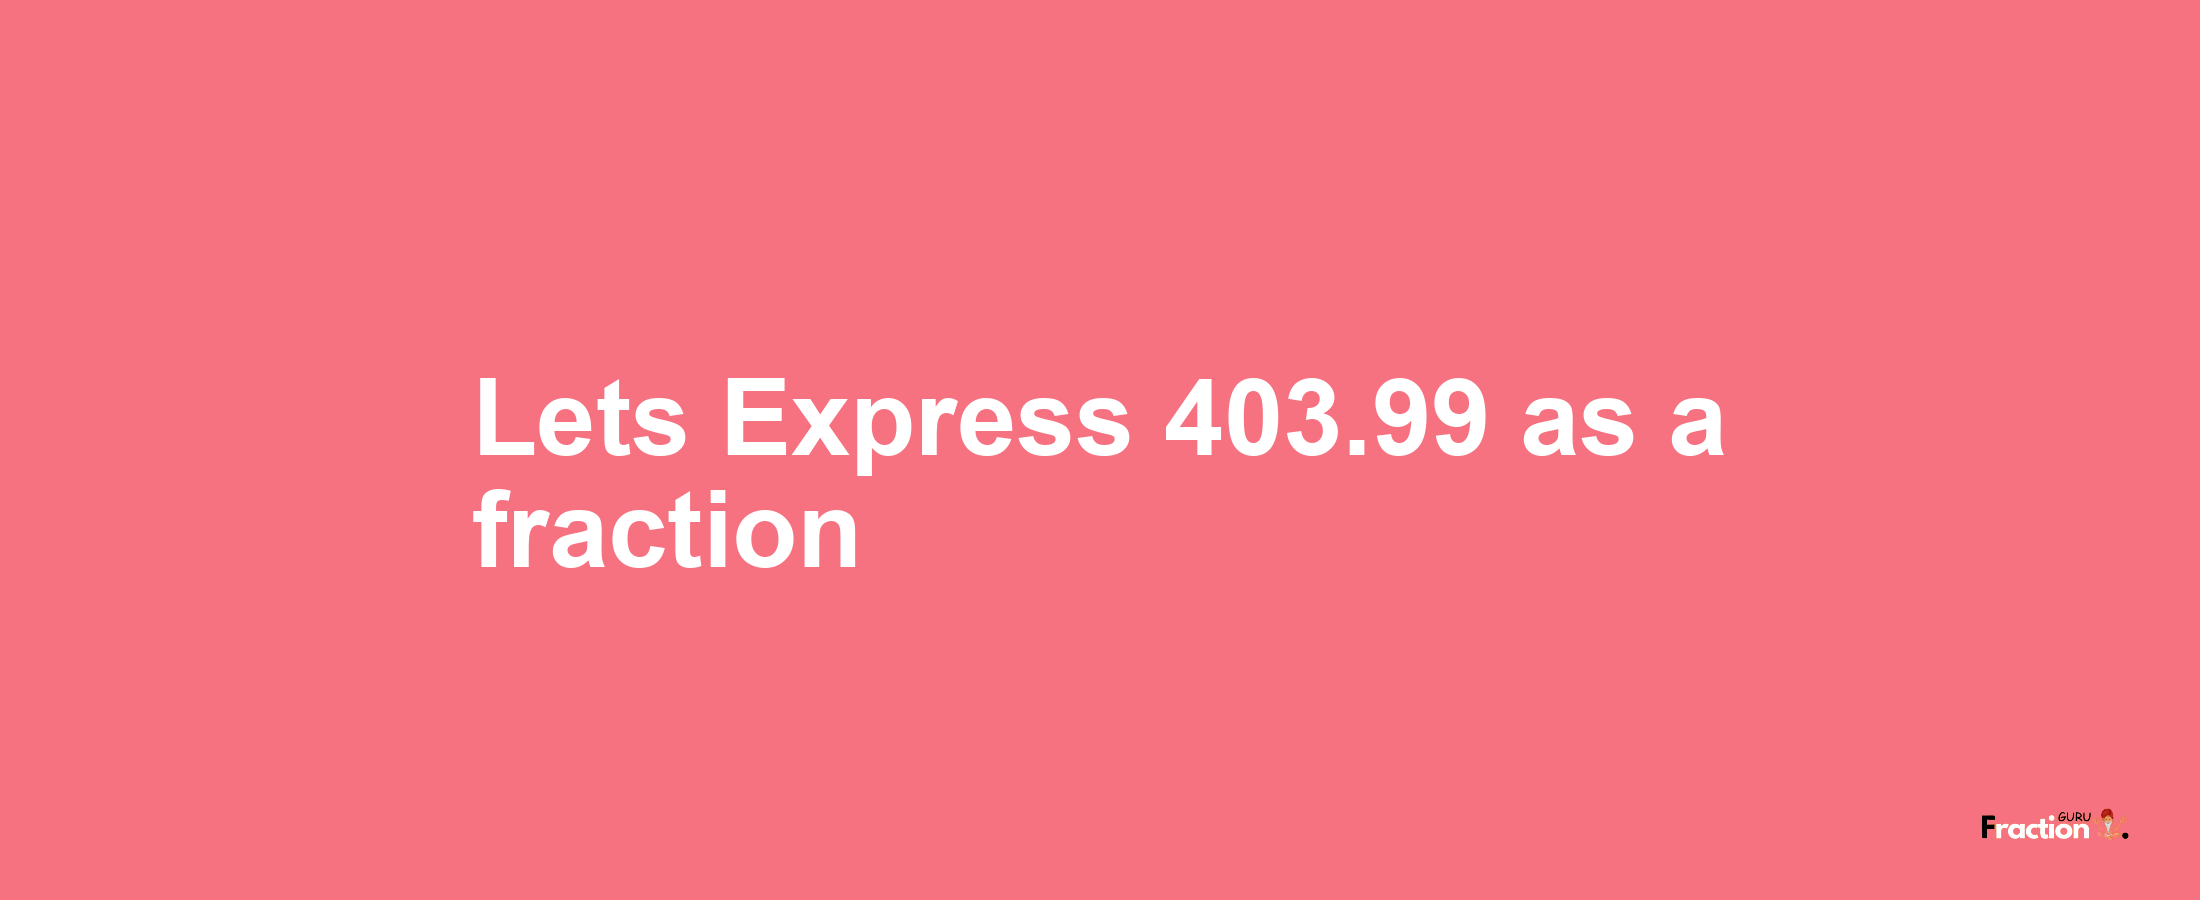 Lets Express 403.99 as afraction